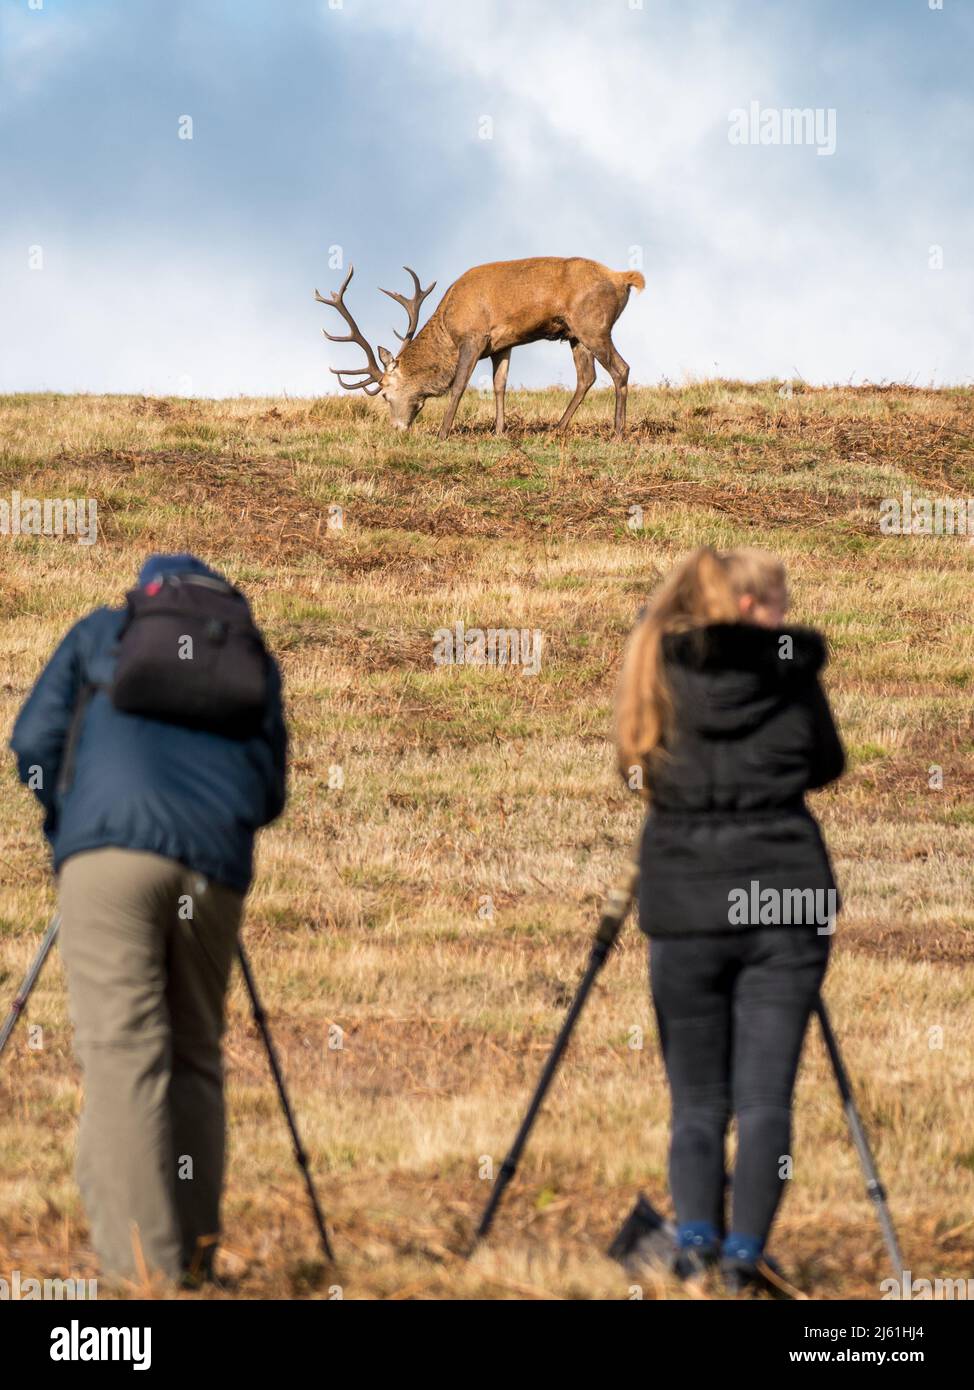 Wildlife photographers with tripods photographing Red Deer stag in Bradgate Park, Leicestershire, England UK (SELECTIVE FOCUS ON DEER) Stock Photo